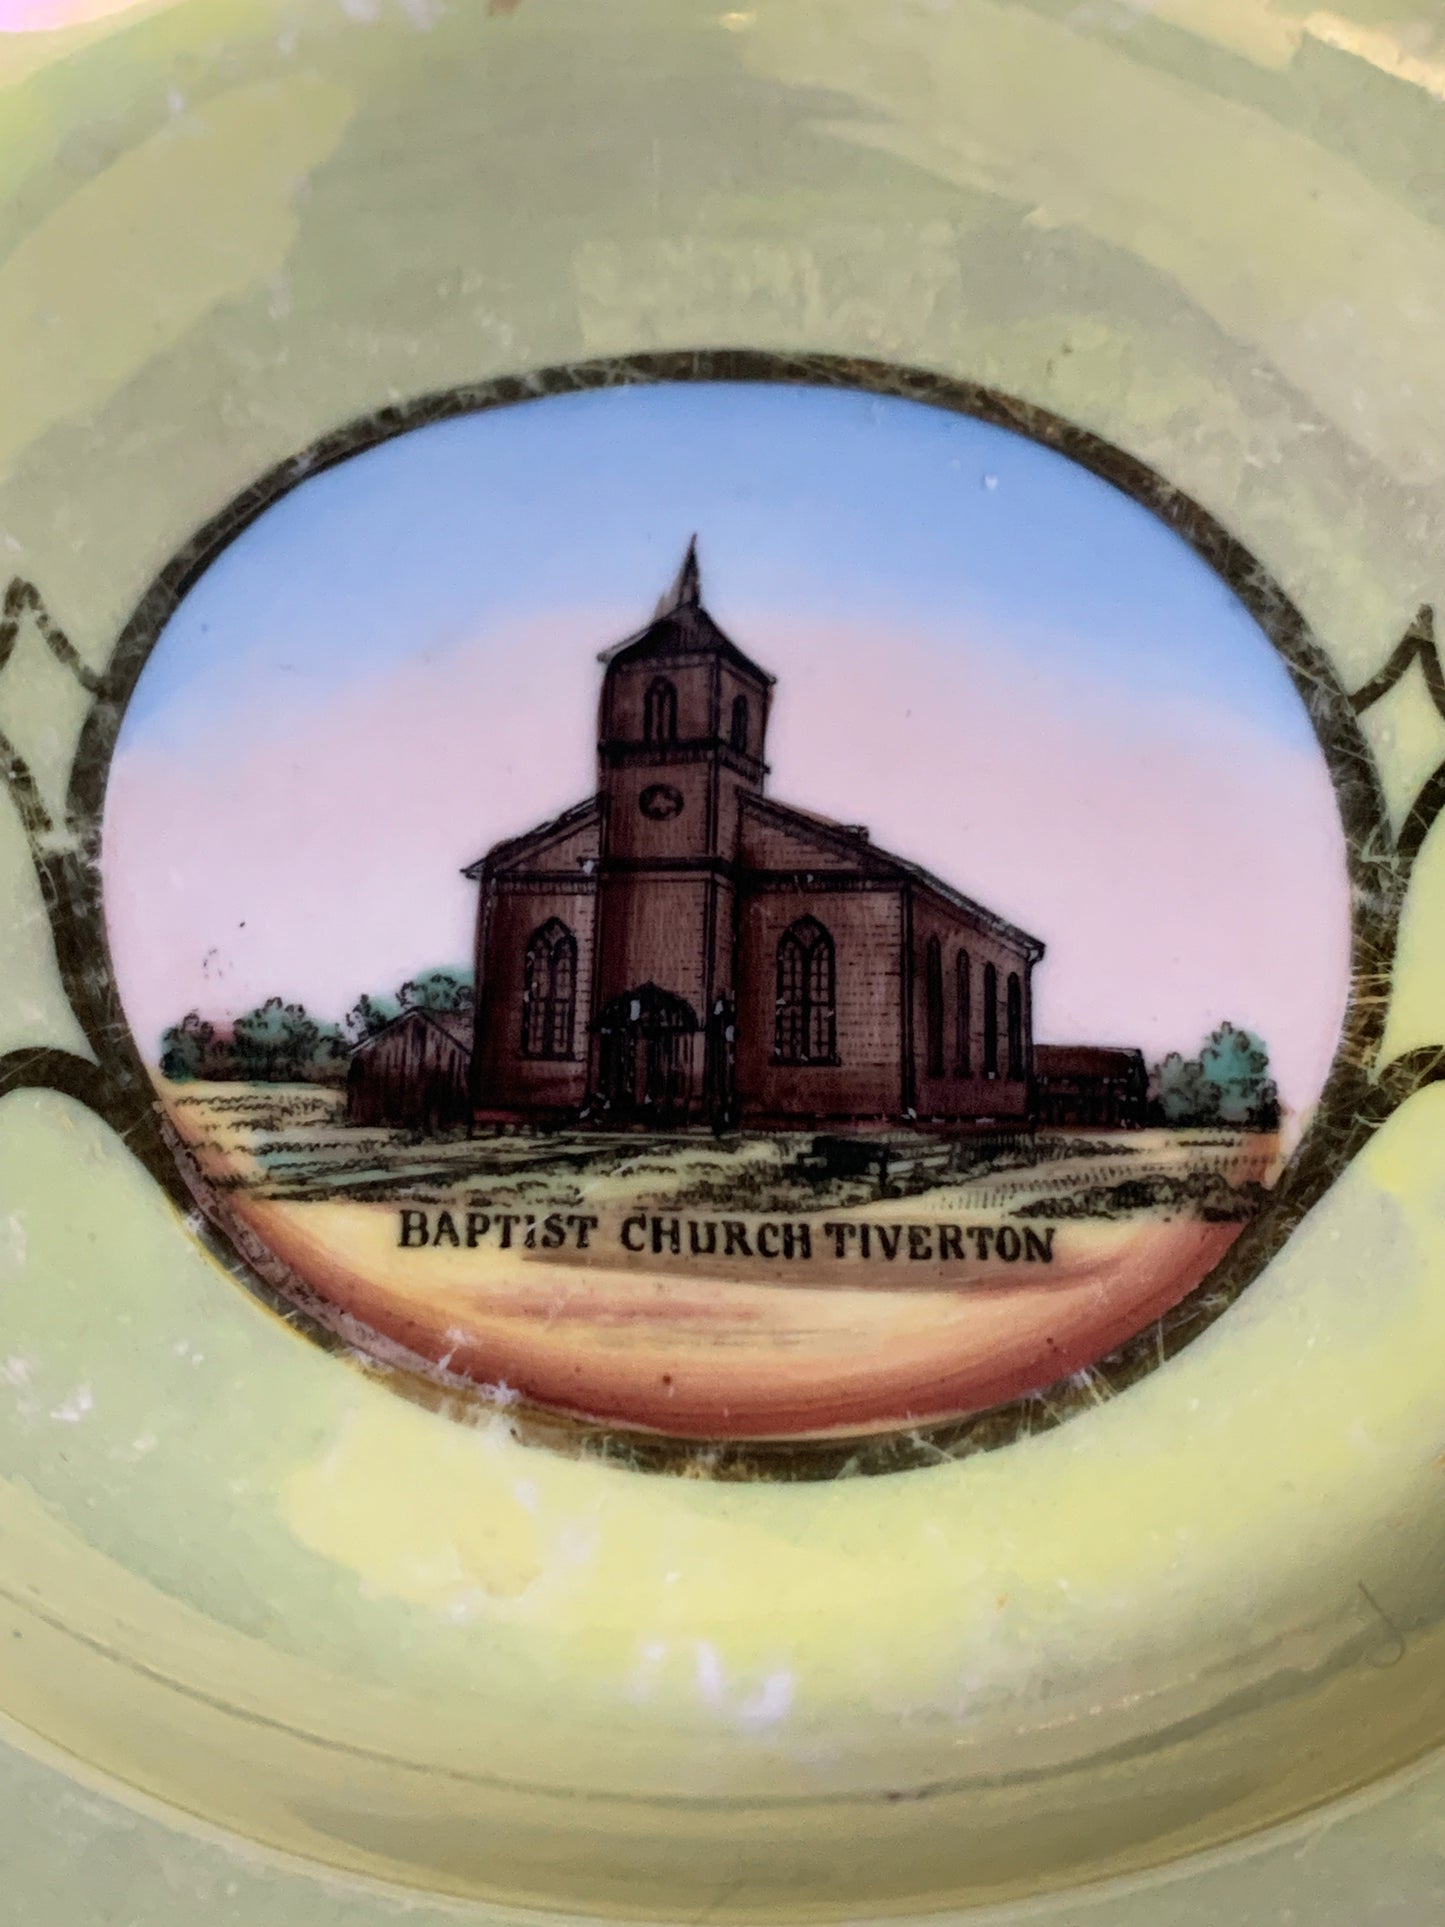 Southern Ontario Churches Instant Collection Collector Plates Grand Millennial Style